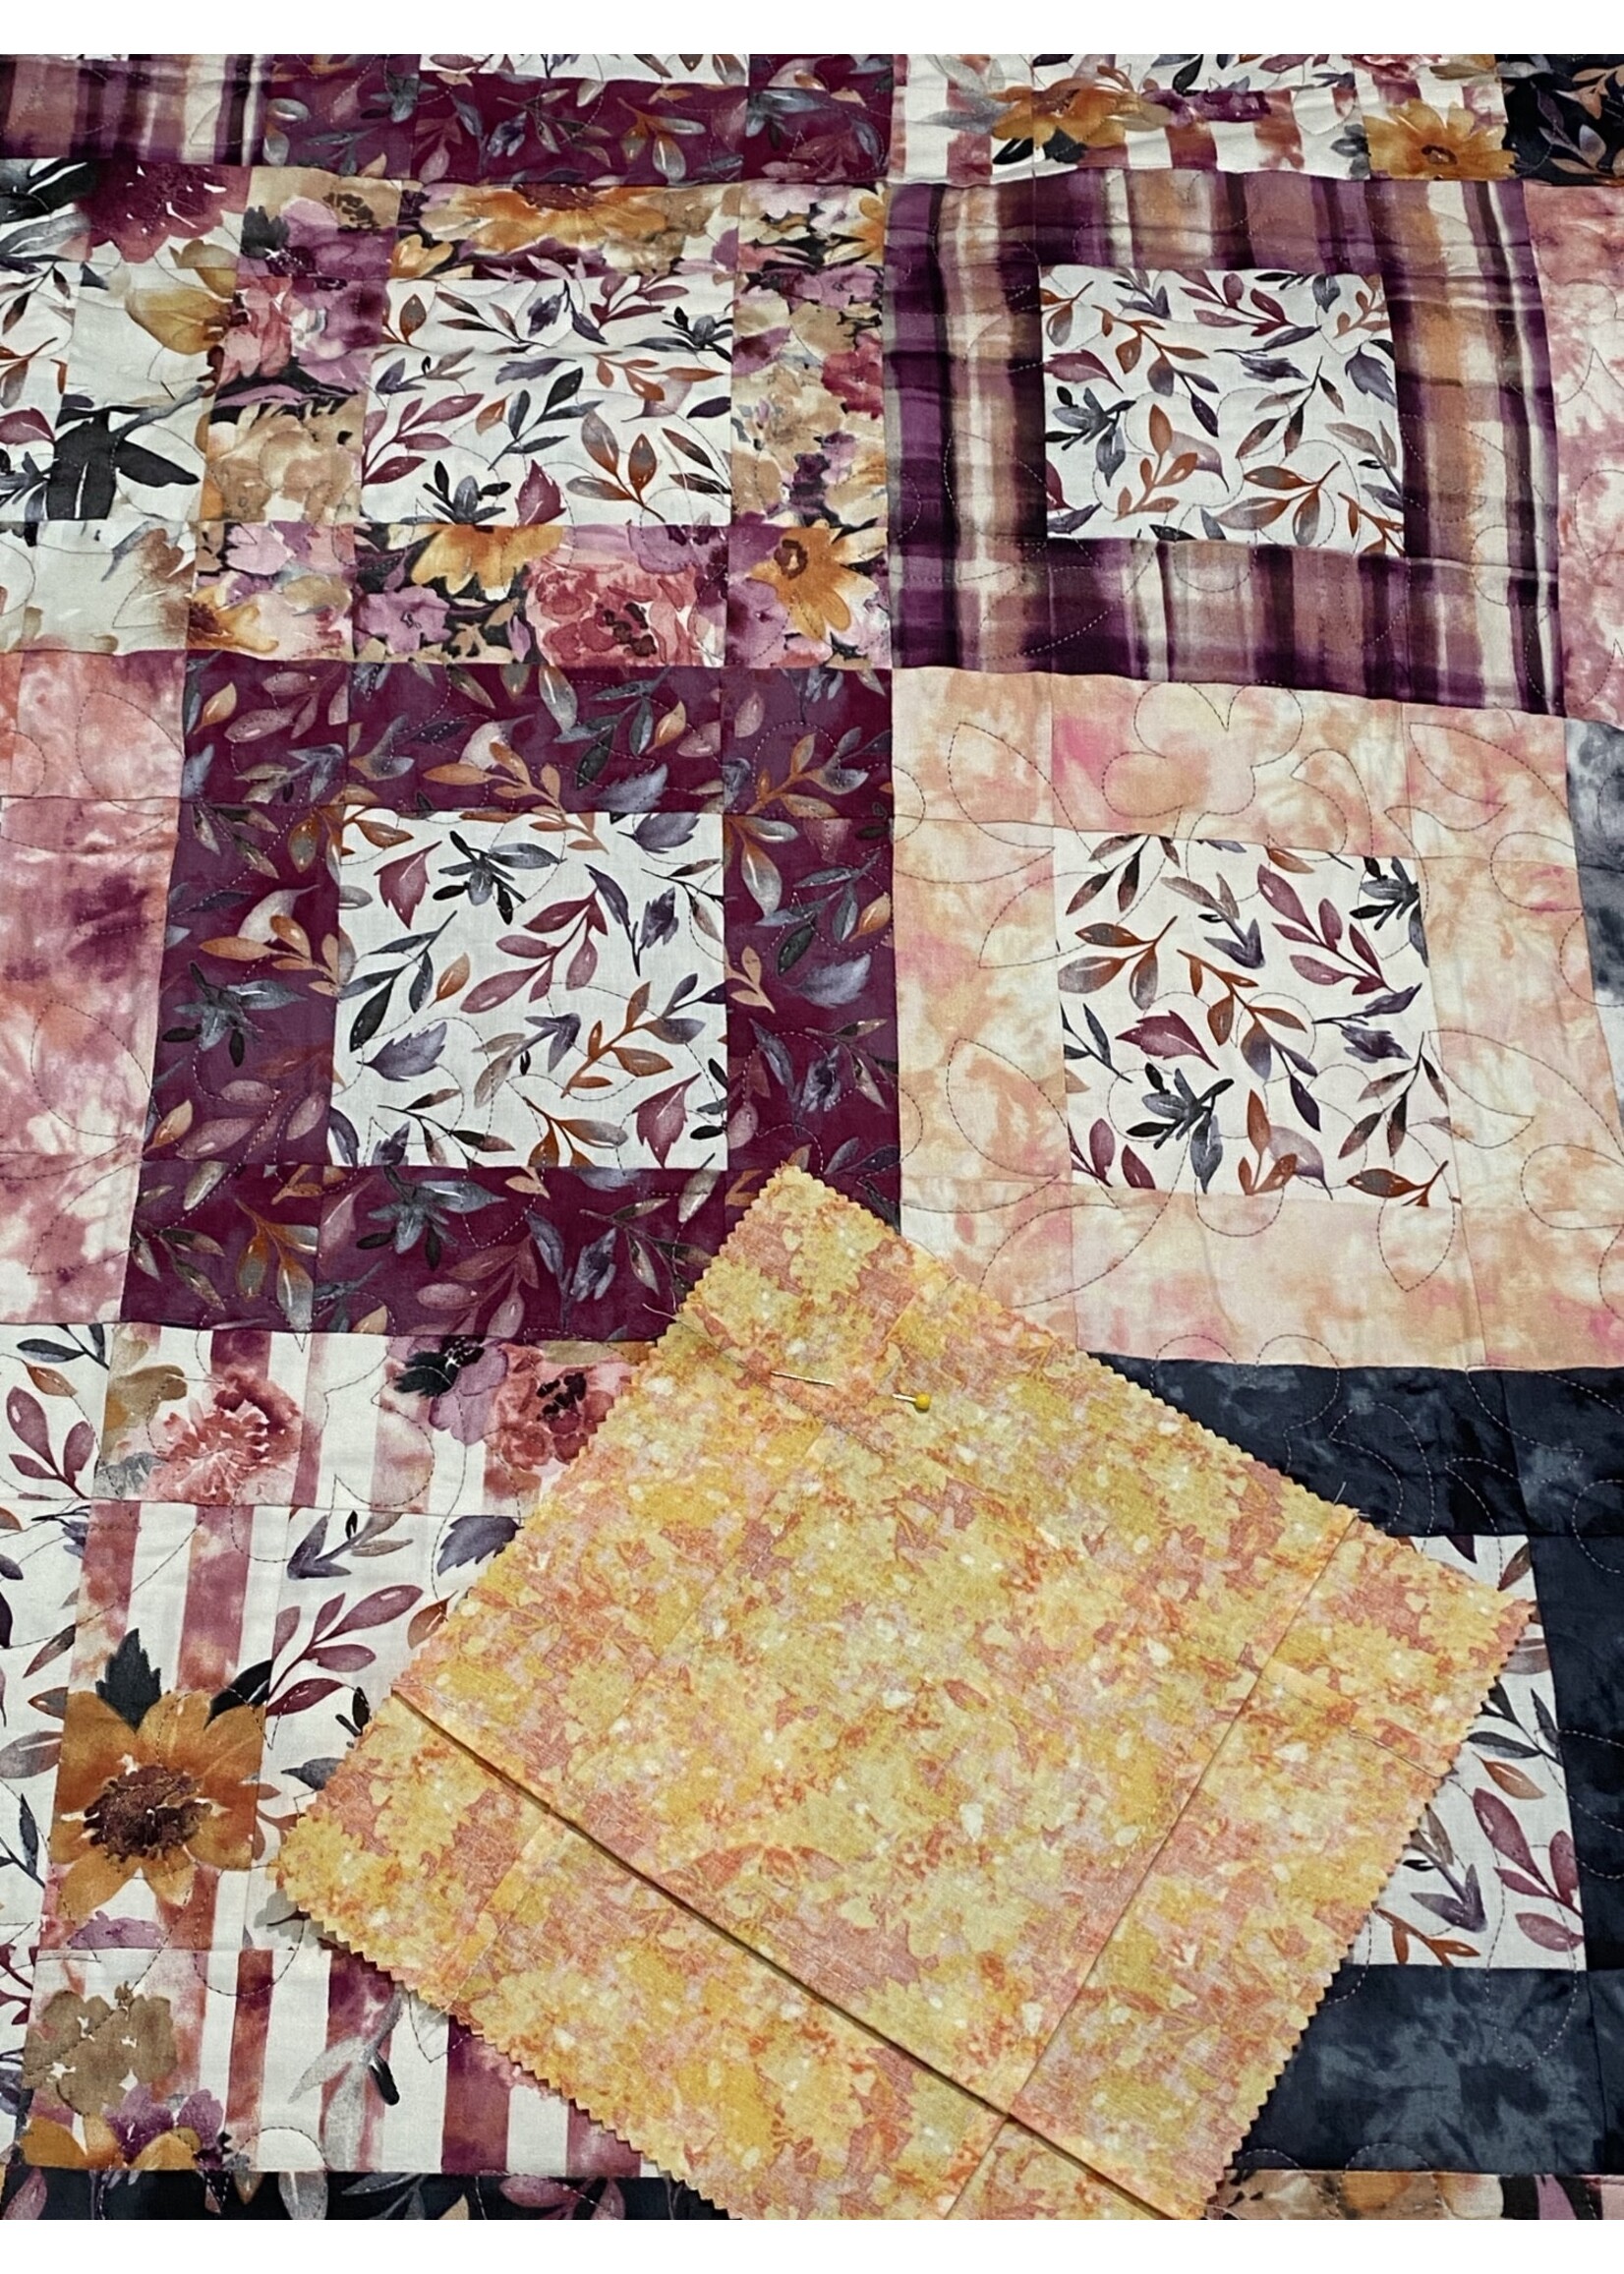 Square in a Square Quilt Class May 26: 10am to 4pm